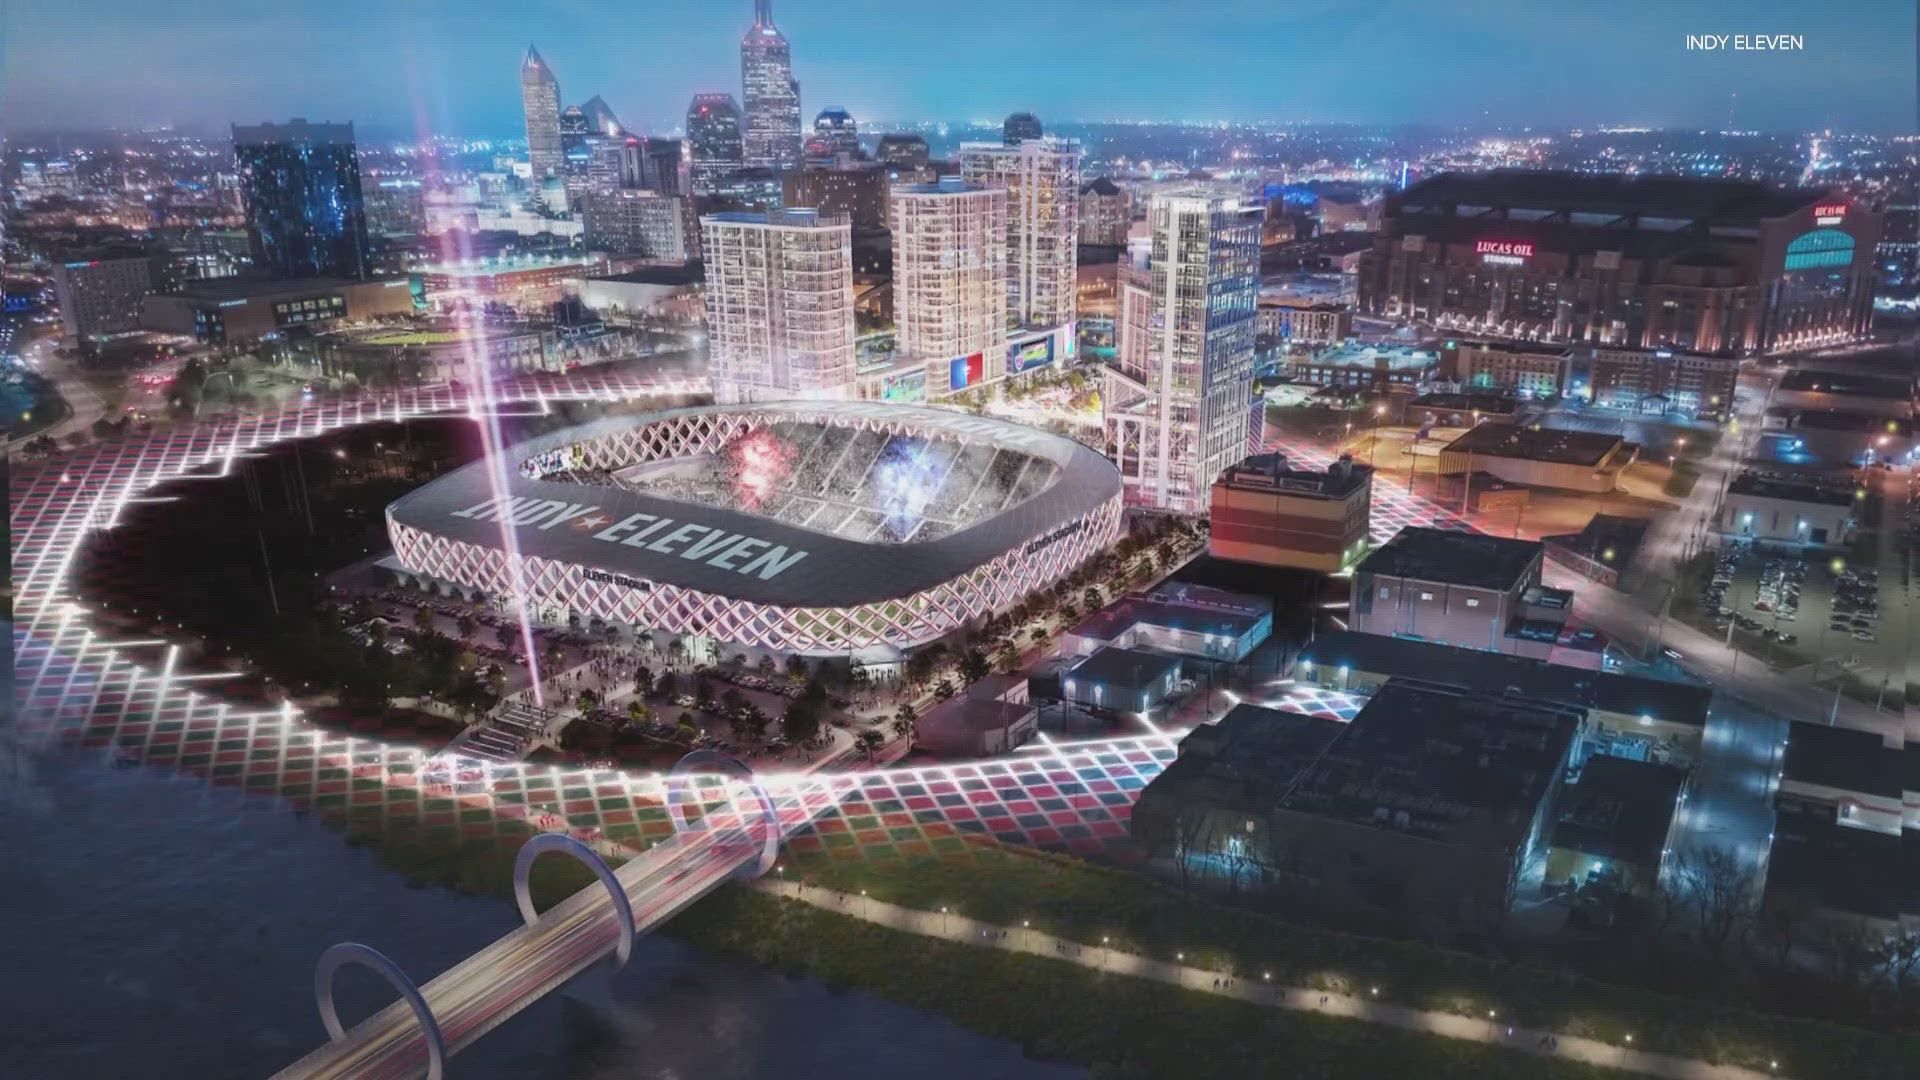 The group said they have been left out of the conversation as the mayor seeks to bring an MLS team to Indy.